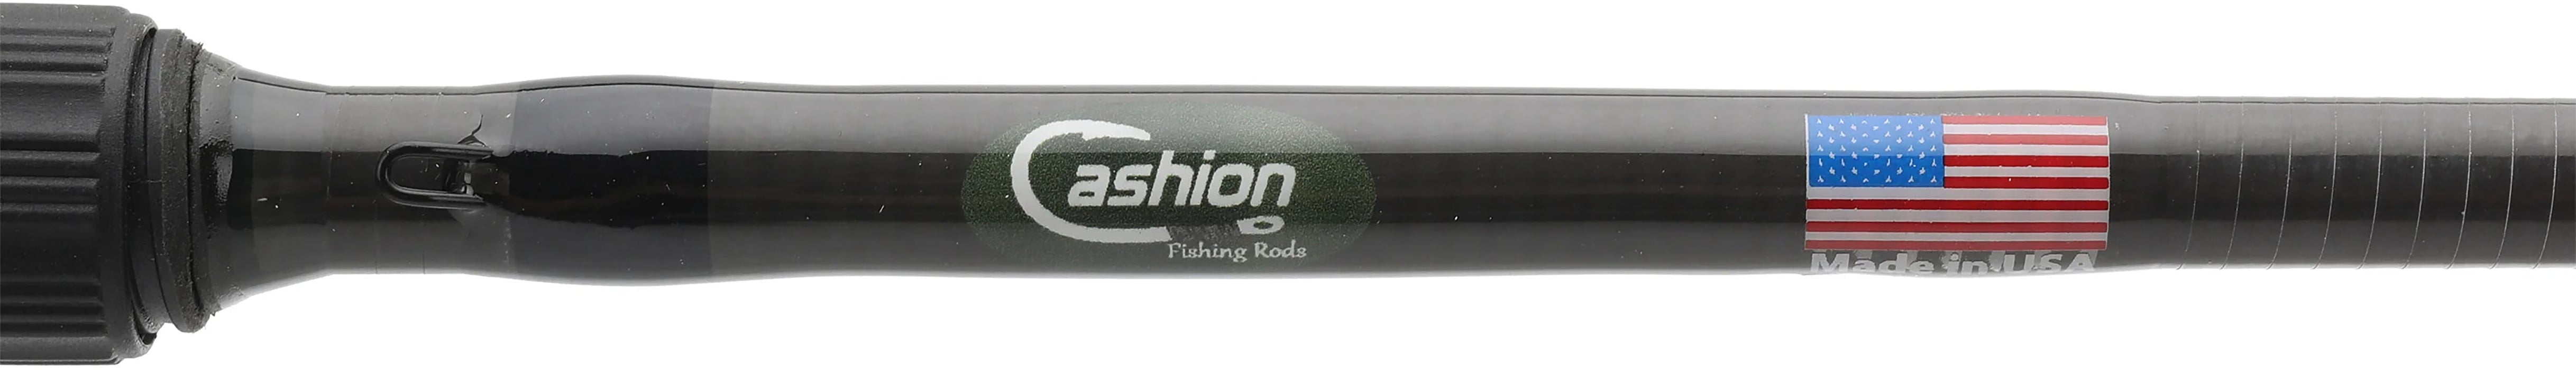 Cashion ICON Series Flipping Casting Rods